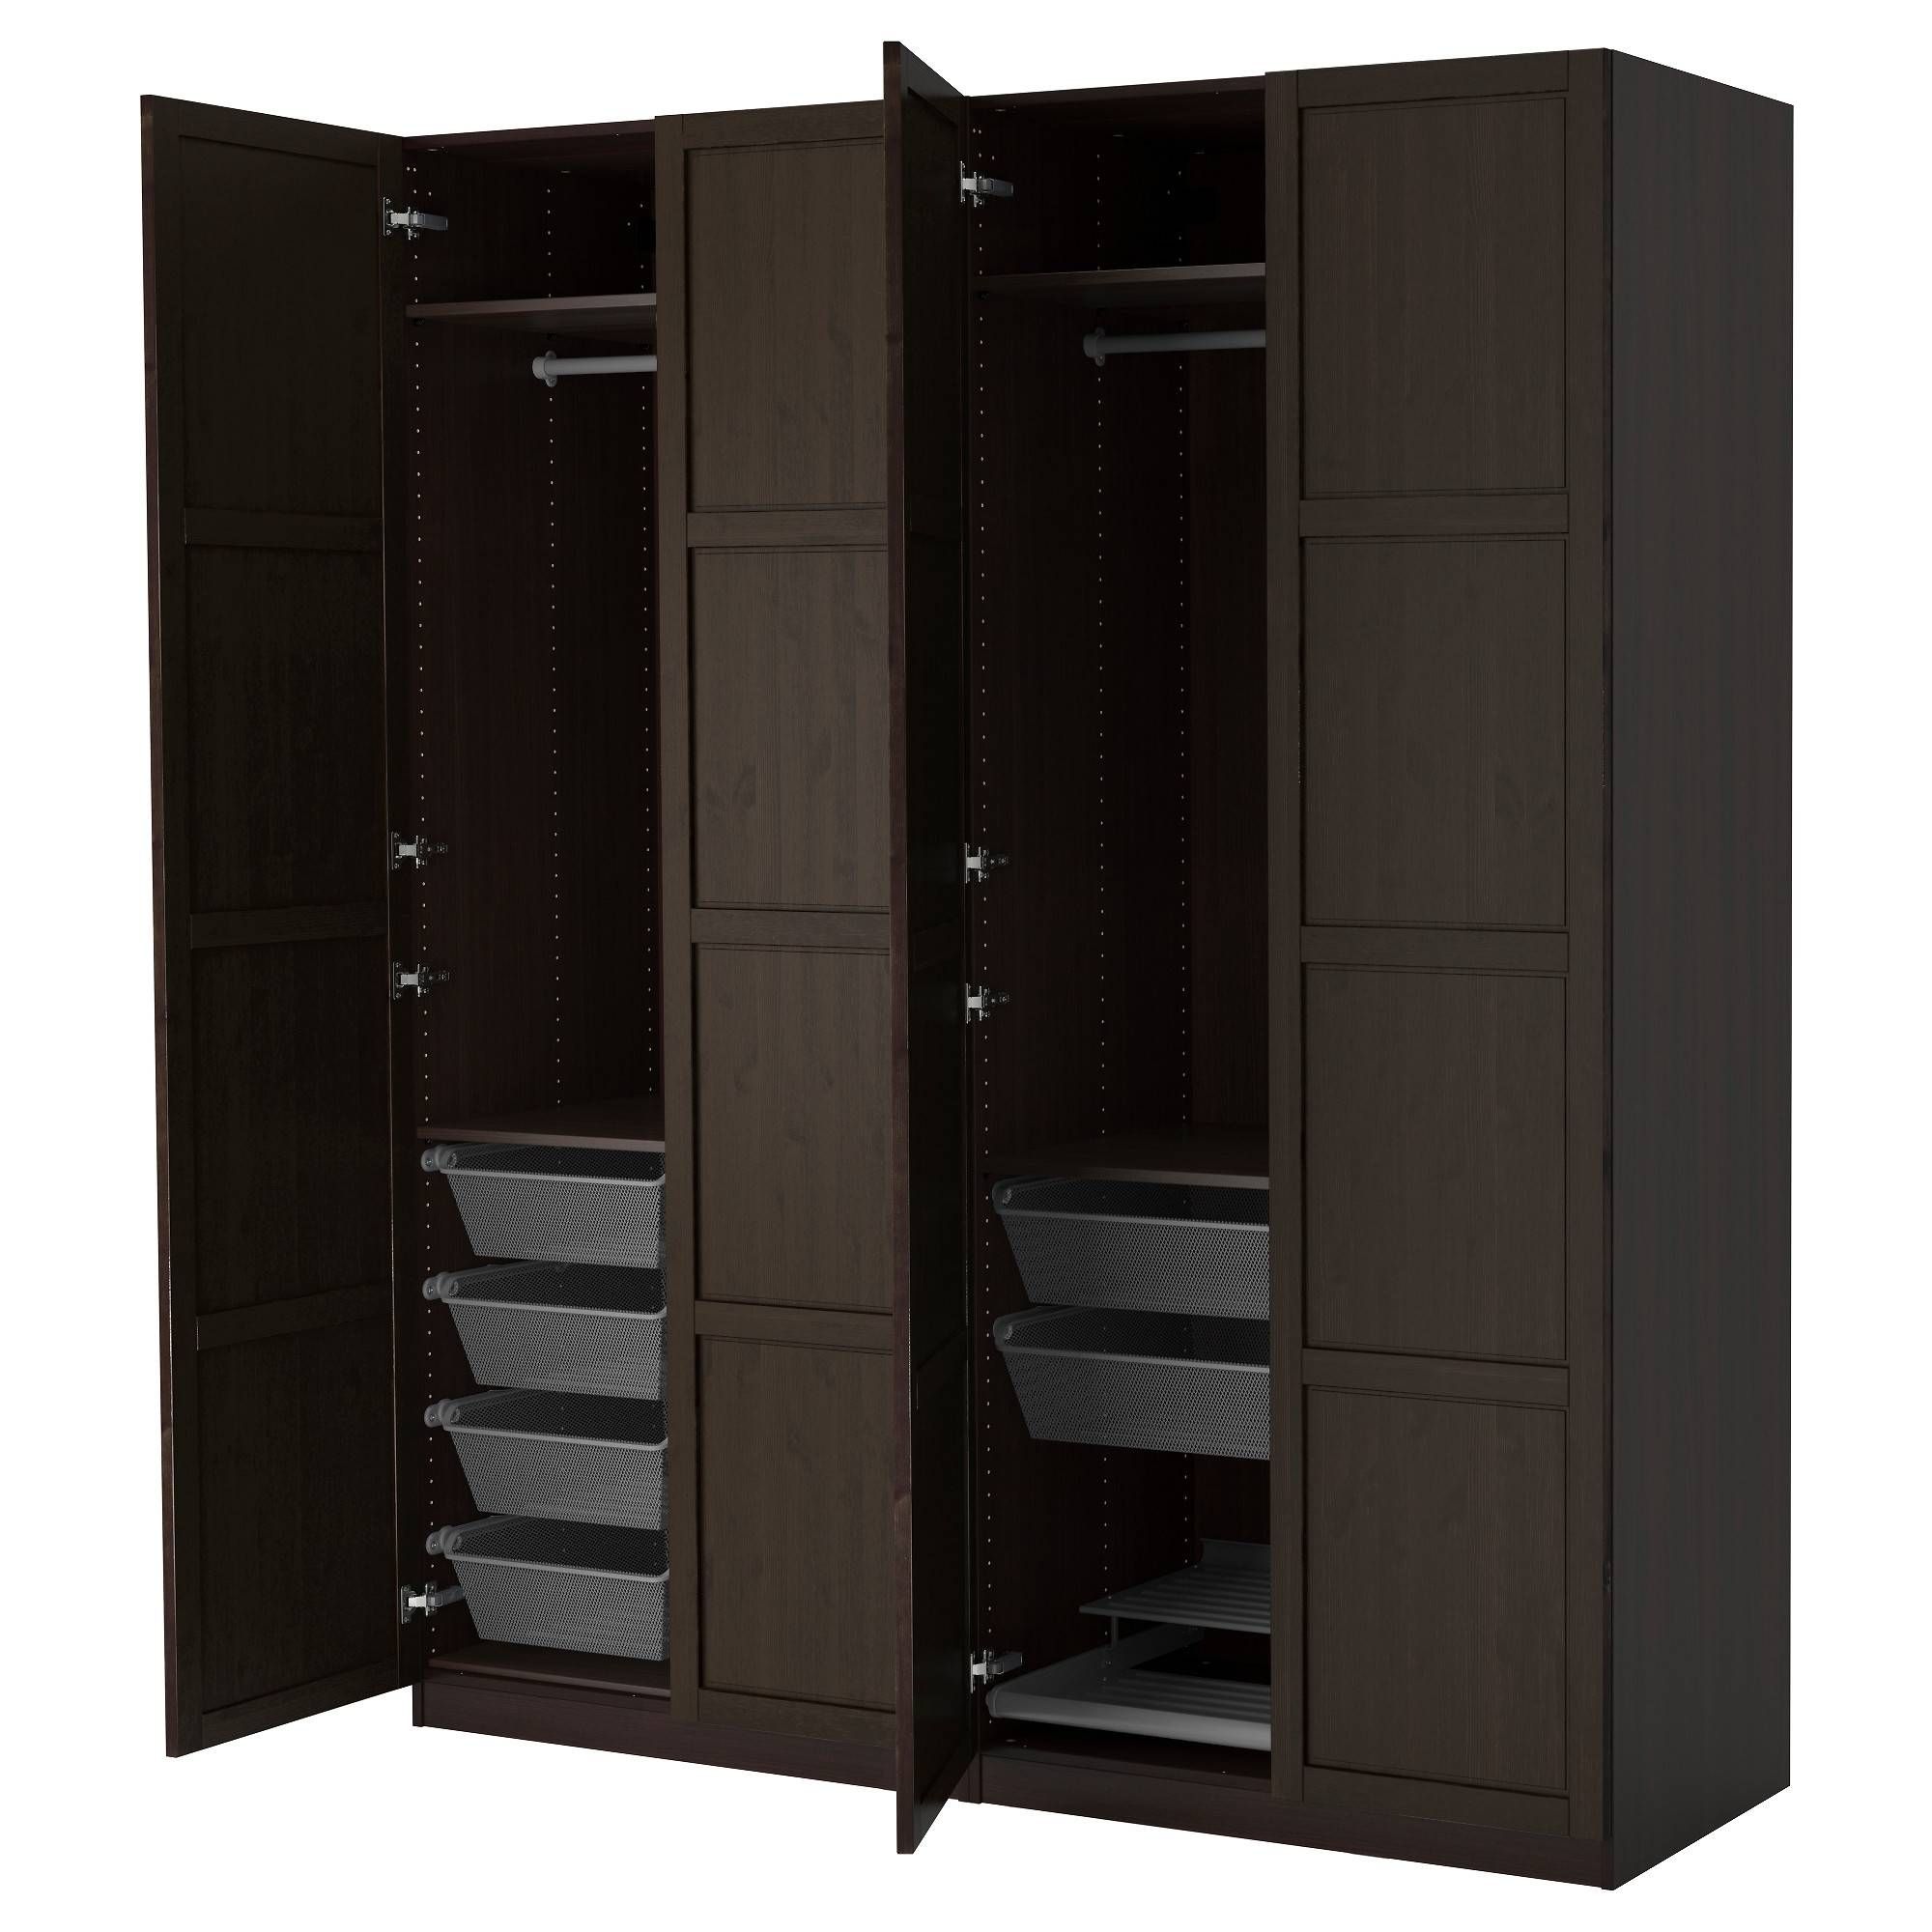 Wardrobes – Pax System – Ikea In Single Wardrobe With Drawers And Shelves (View 14 of 30)